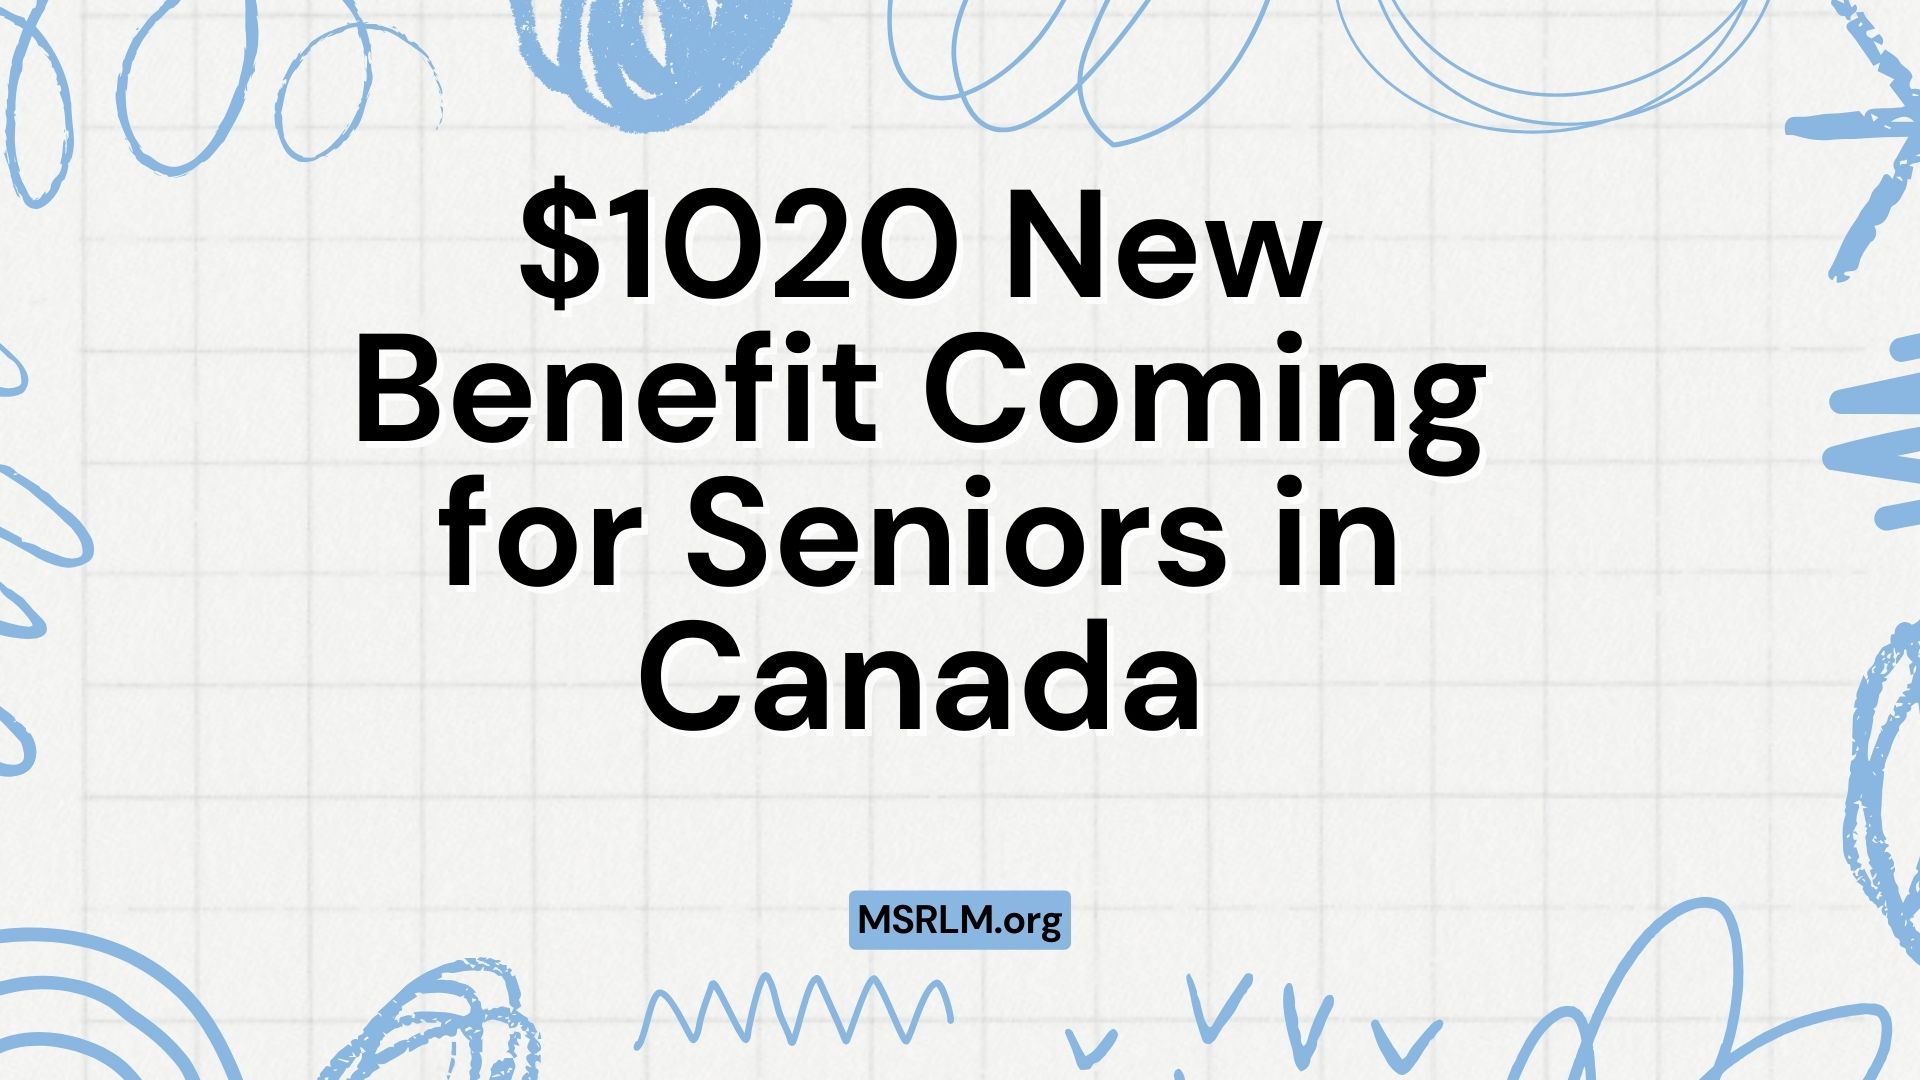 $1020 New Benefit Coming for Seniors in Canada: